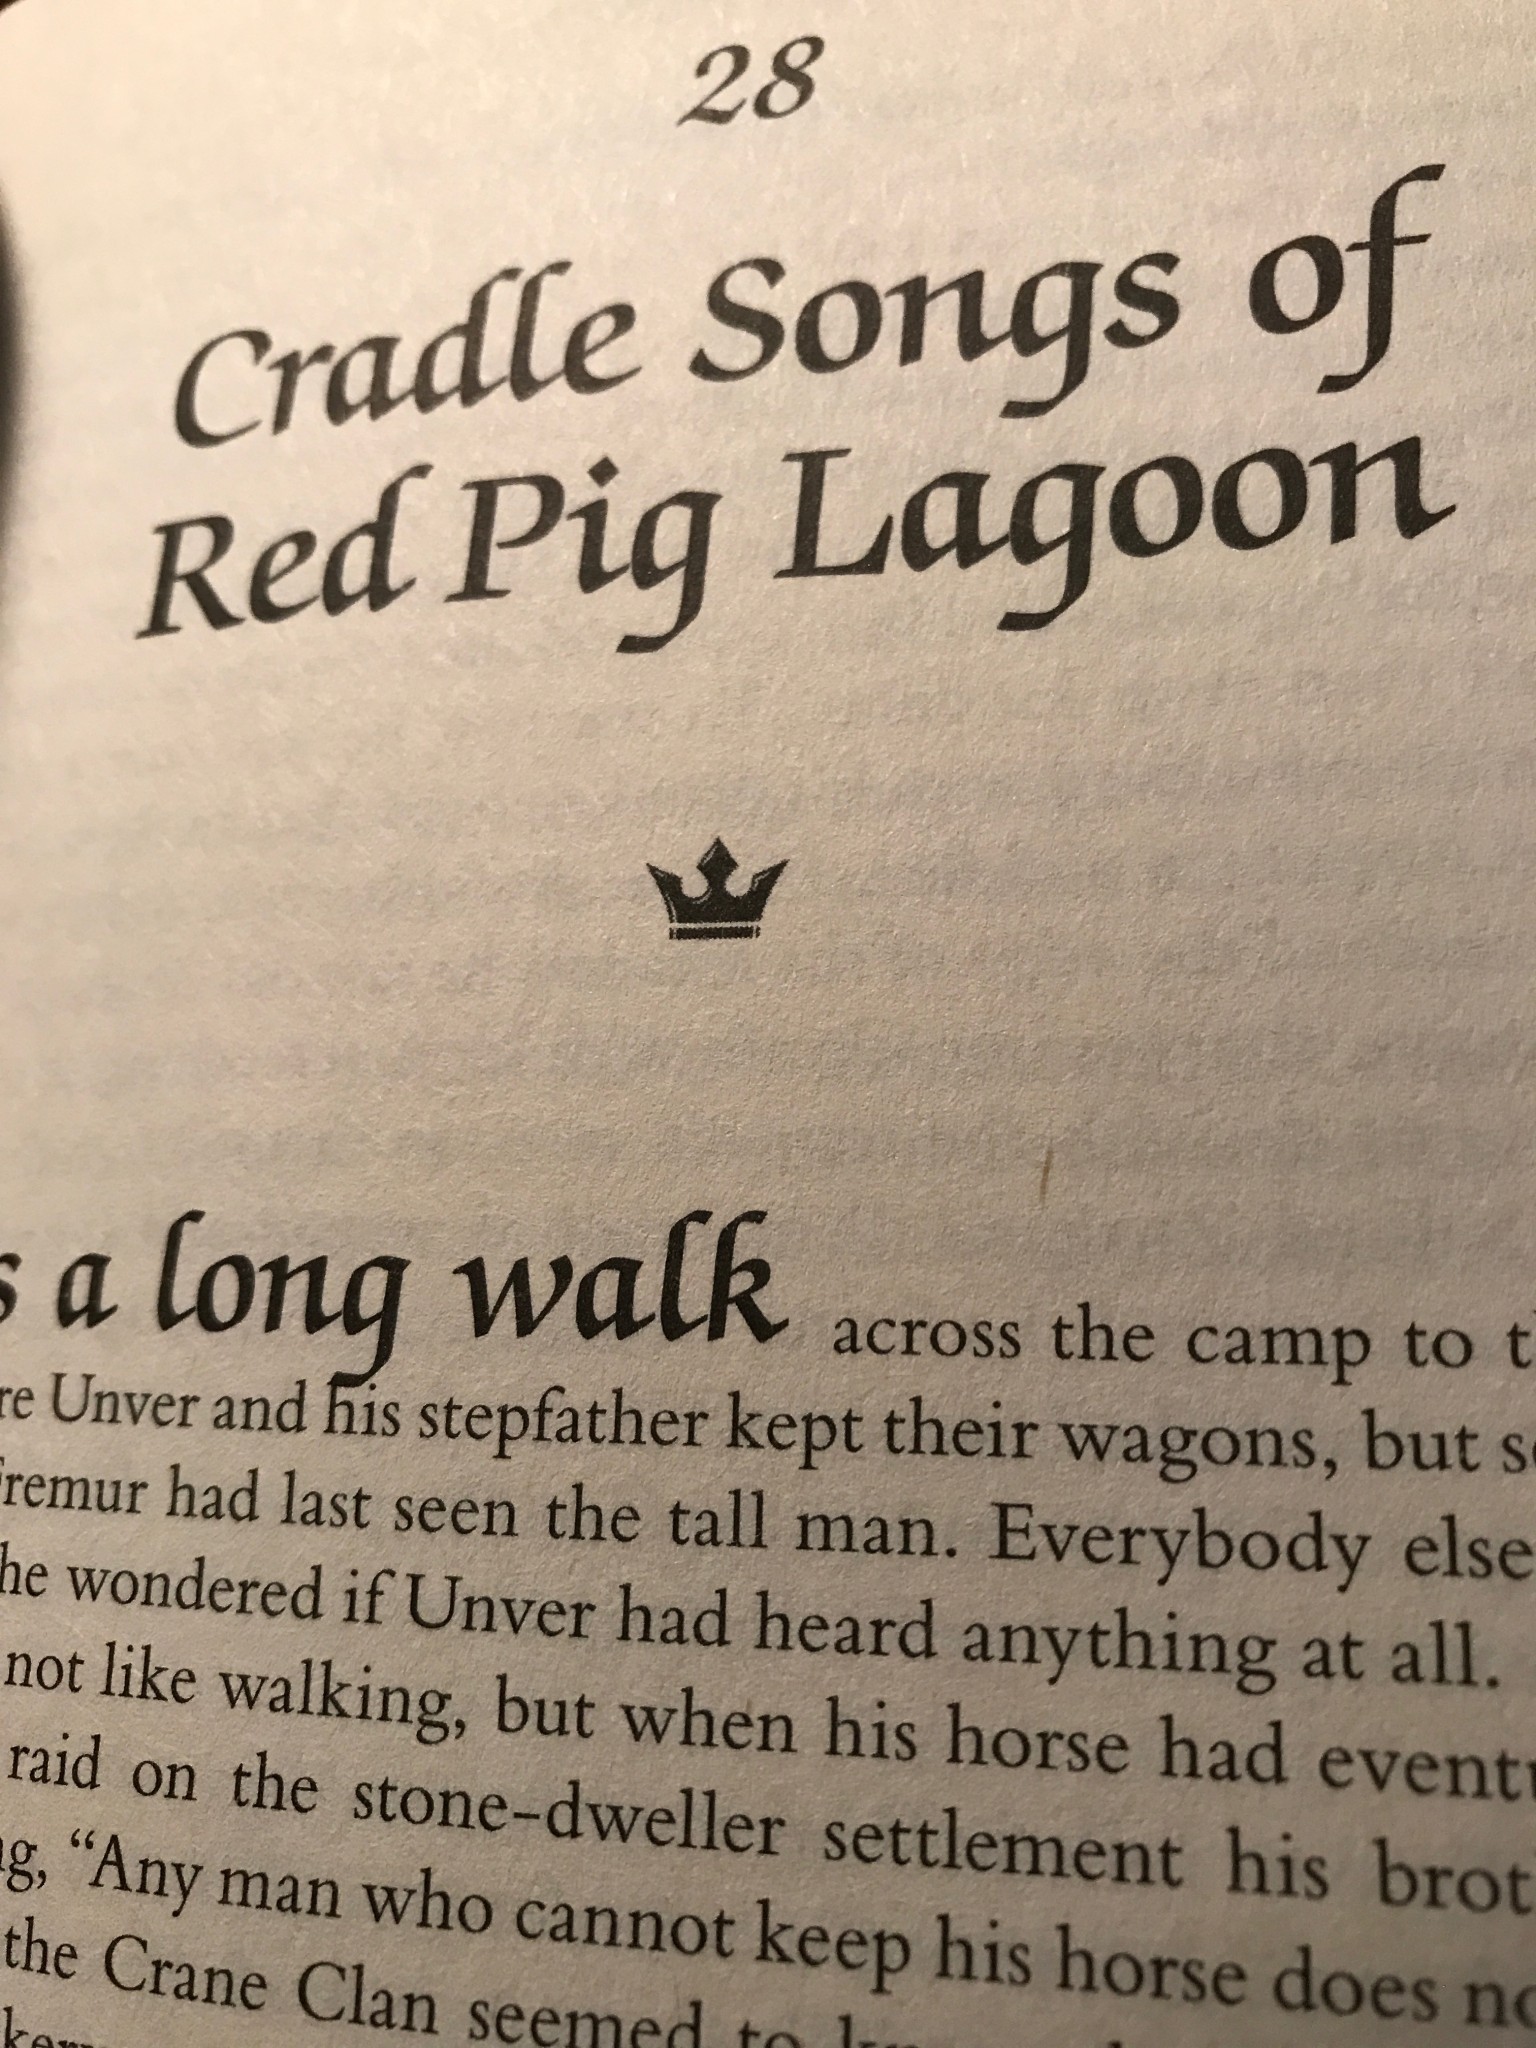 The Witchwood Crown chapter name